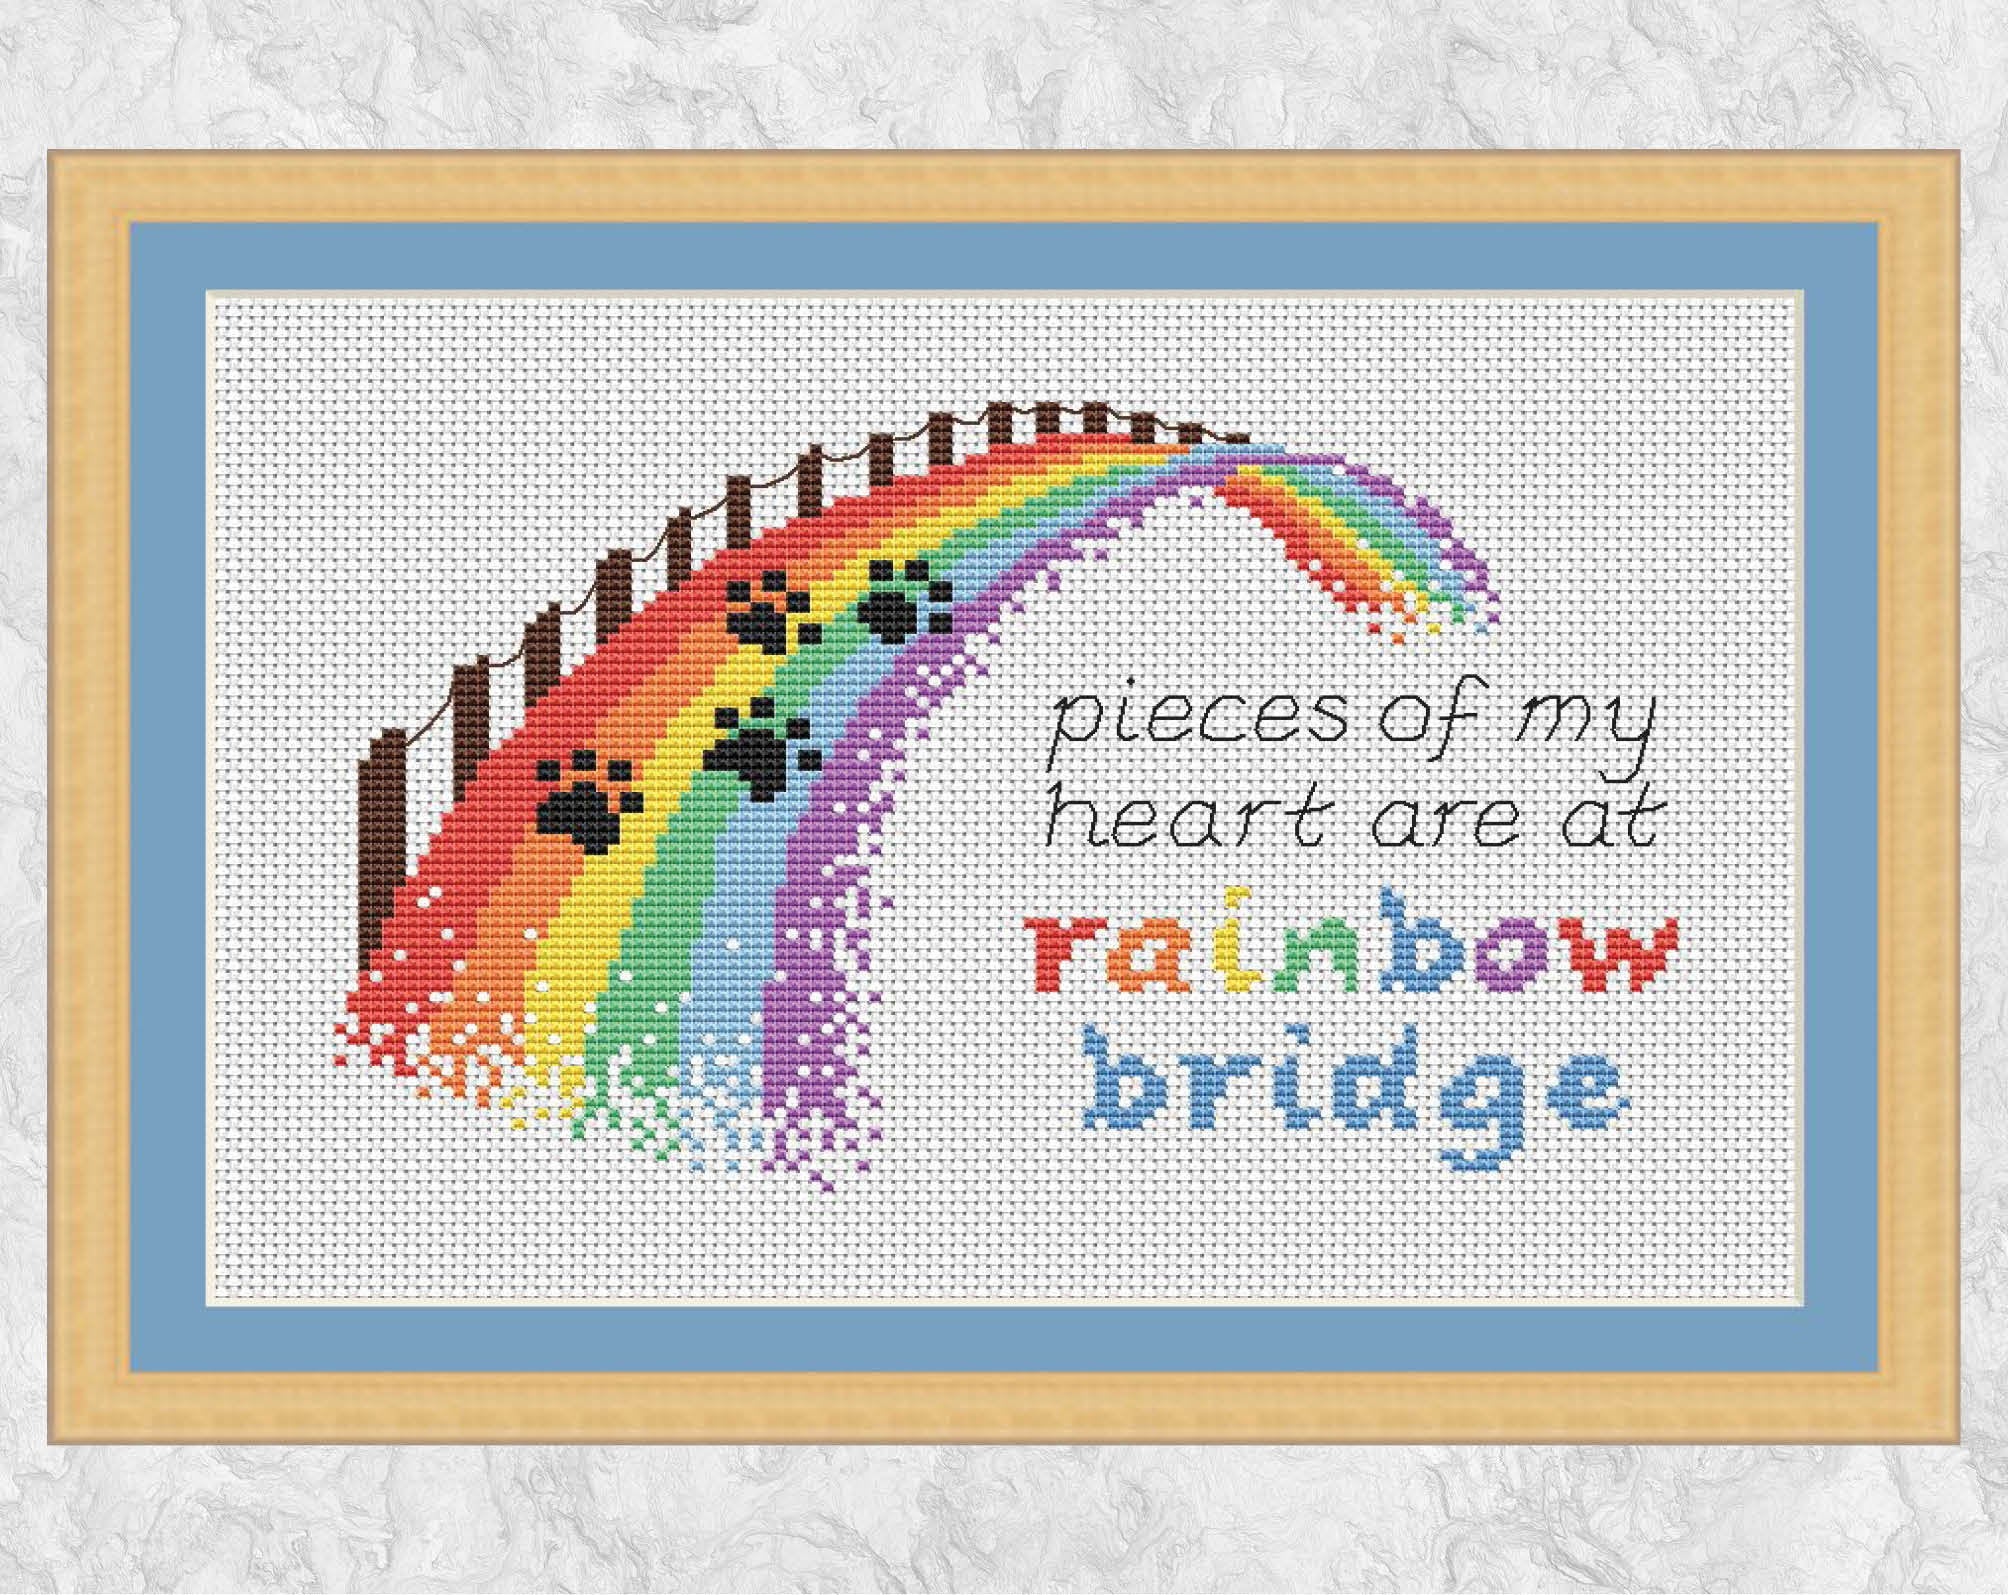 Cross stitch pattern of a rainbow bridge with the quote "pieces of my heart are at rainbow bridge". Shown with frame.